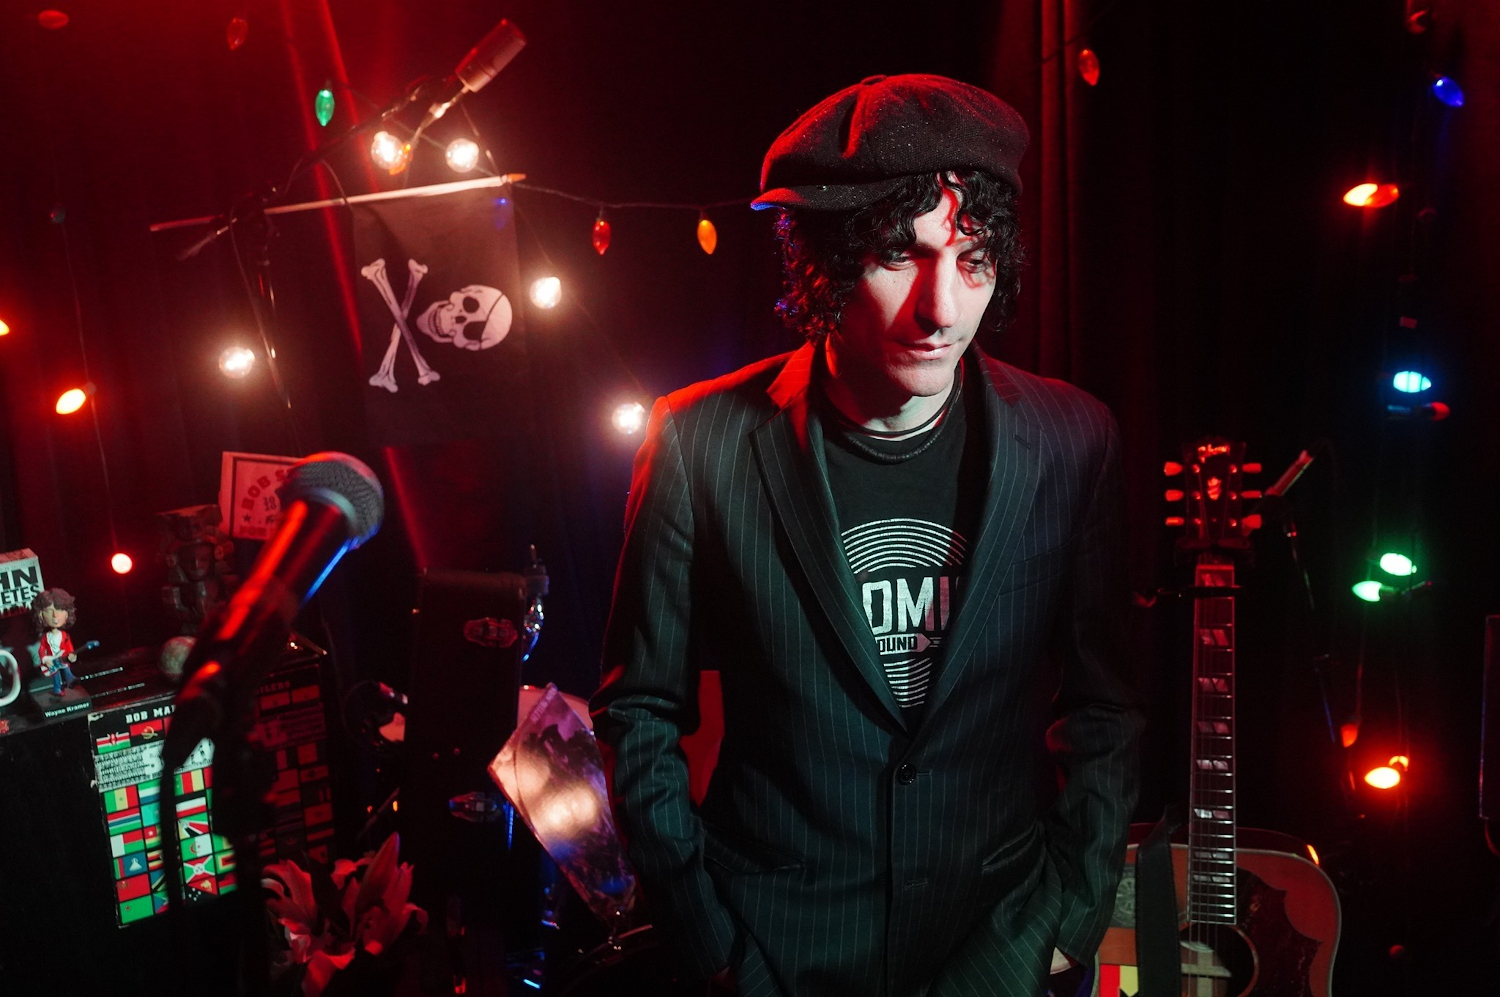 Jesse Malin to play the Netherlands with "Sad and Beautiful World"